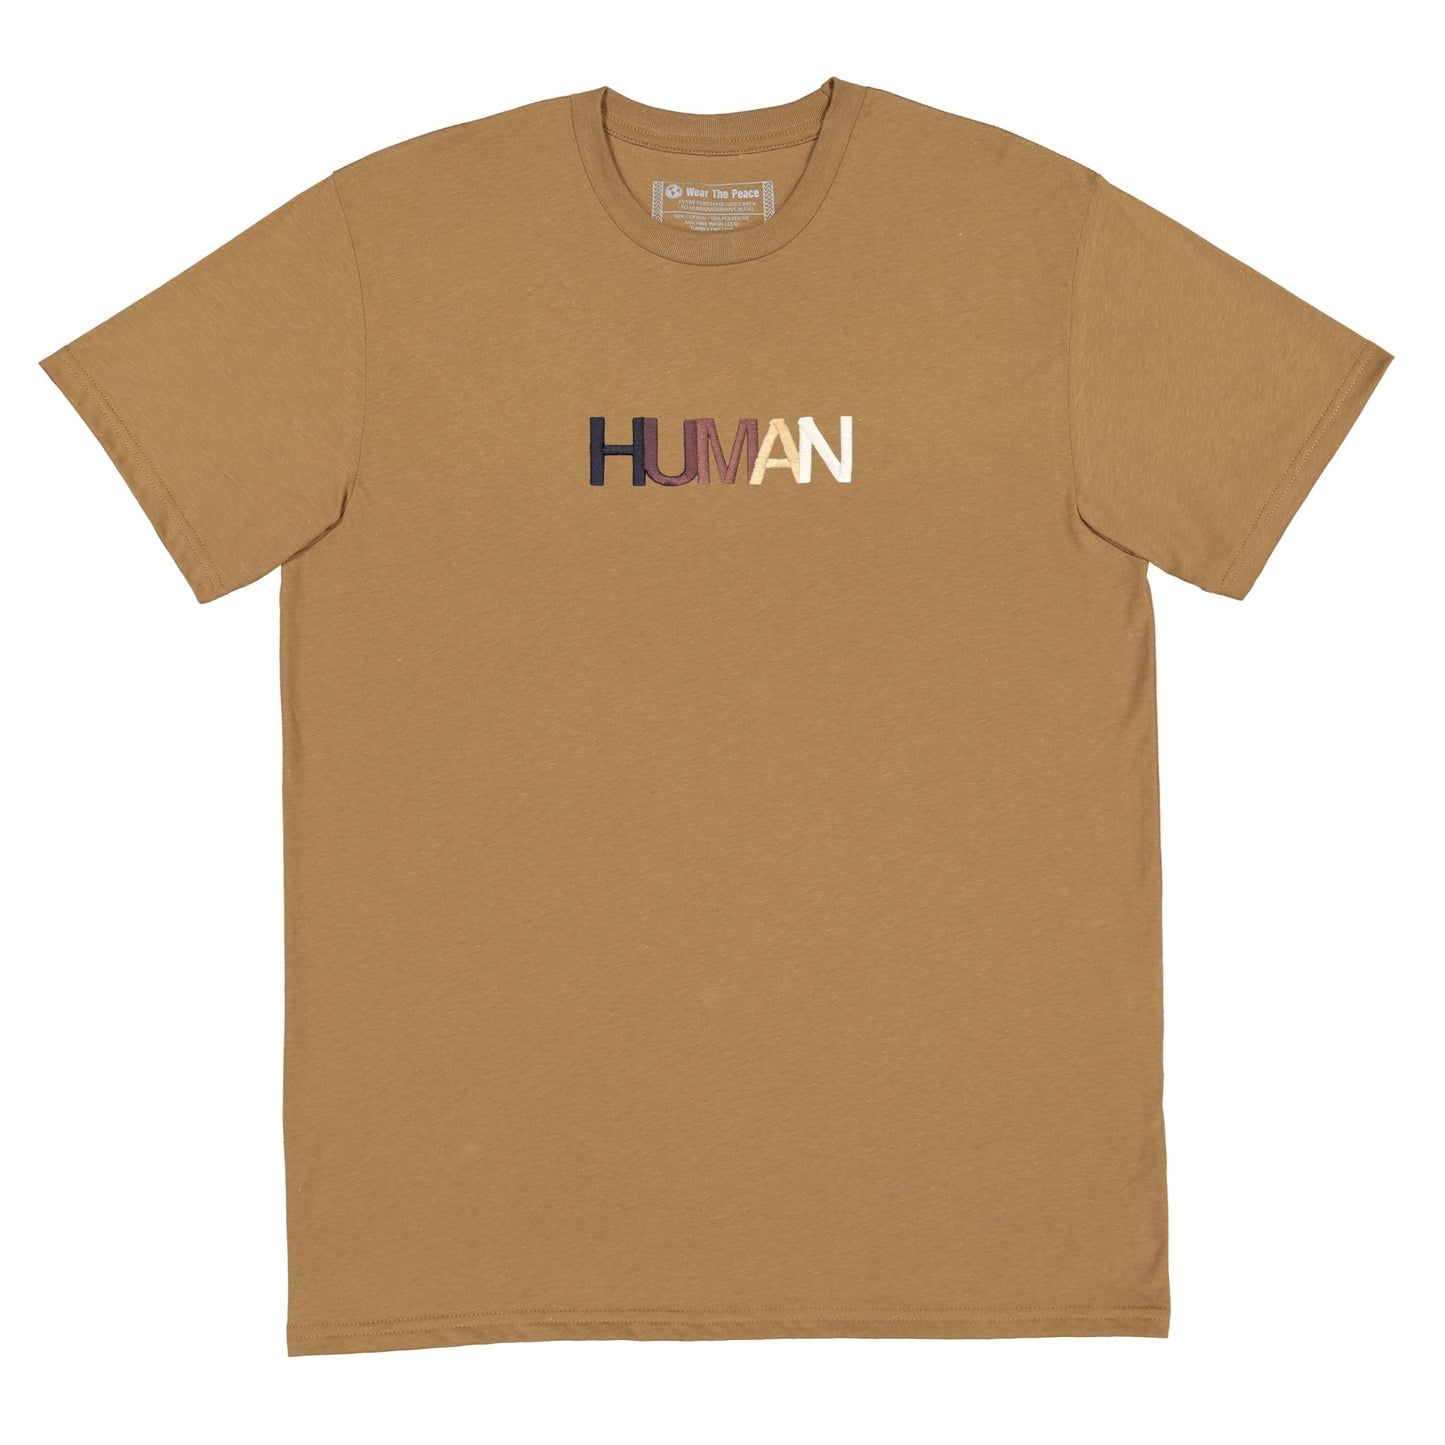 Human Embroidered Tee Wear The Peace Short Sleeves Brown S